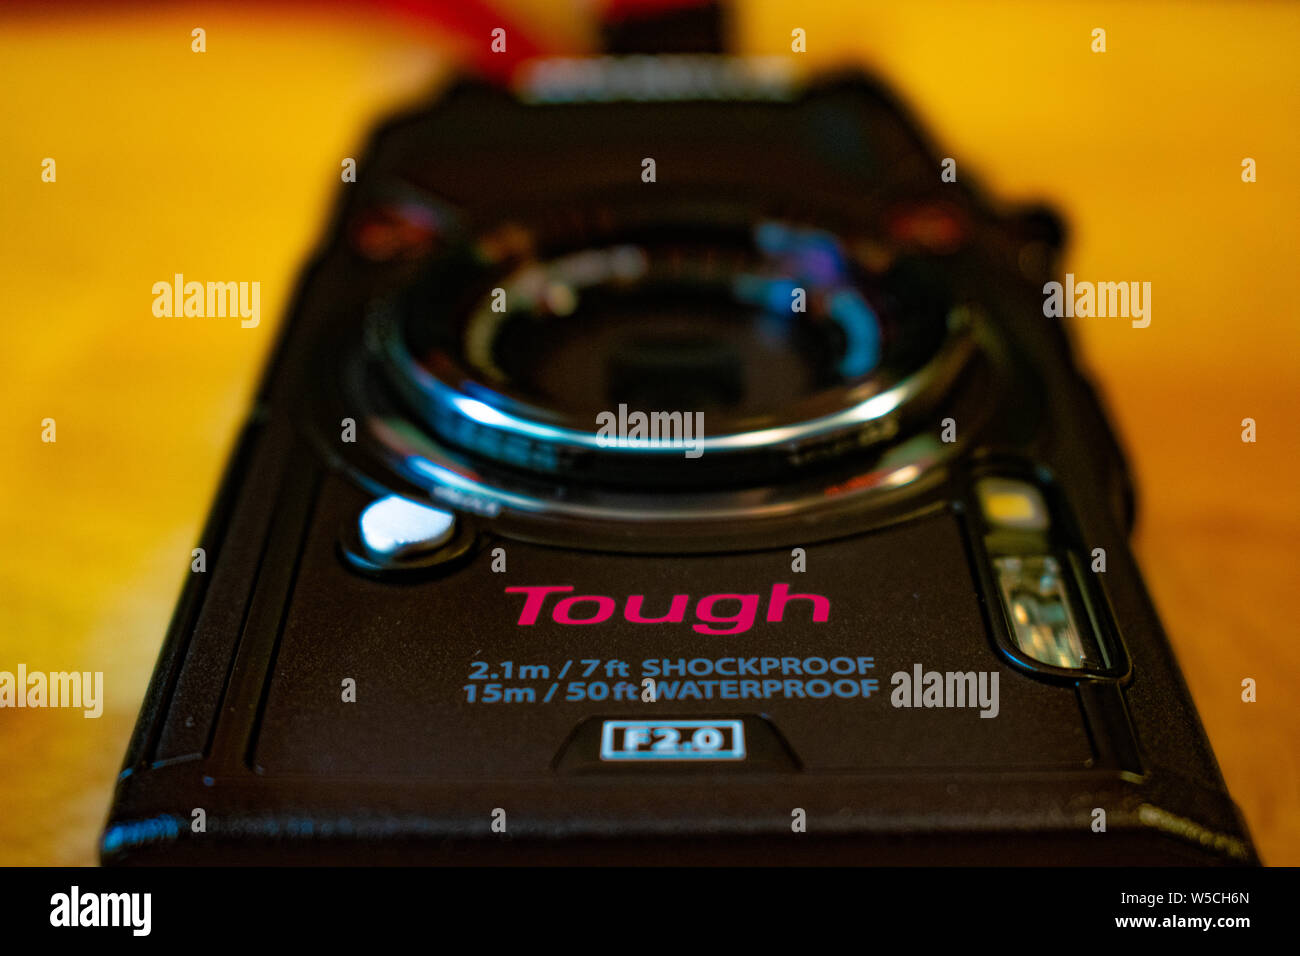 Olympus Tough TG-5 - A shockproof, waterproof indestructible budget compact camera Stock Photo